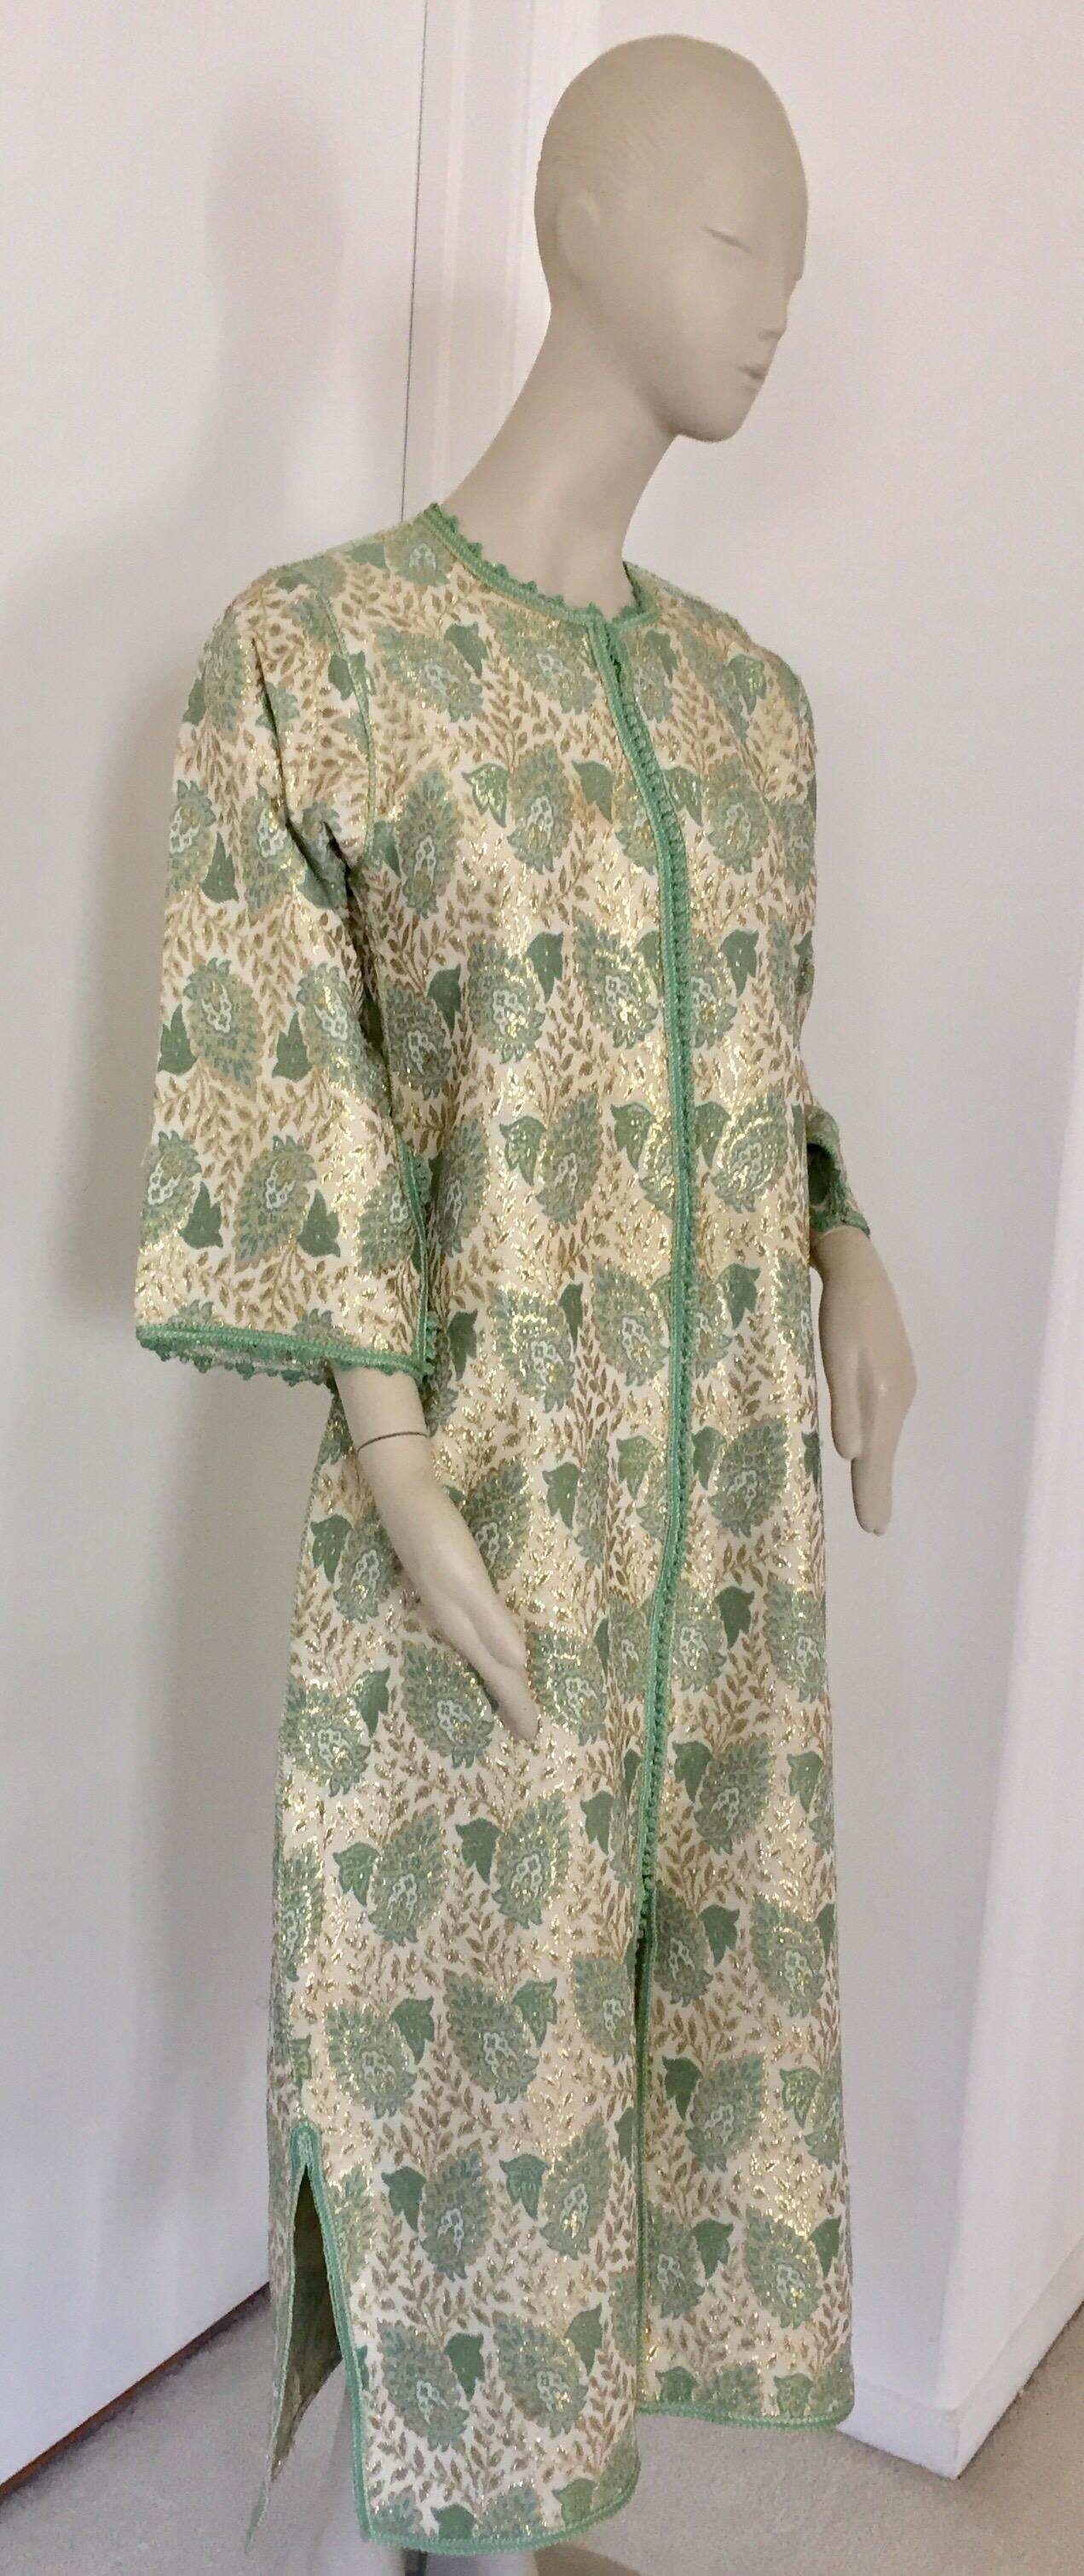 Embroidered Elegant Moroccan Caftan Green and Silver and Gold Metallic Floral Brocade For Sale